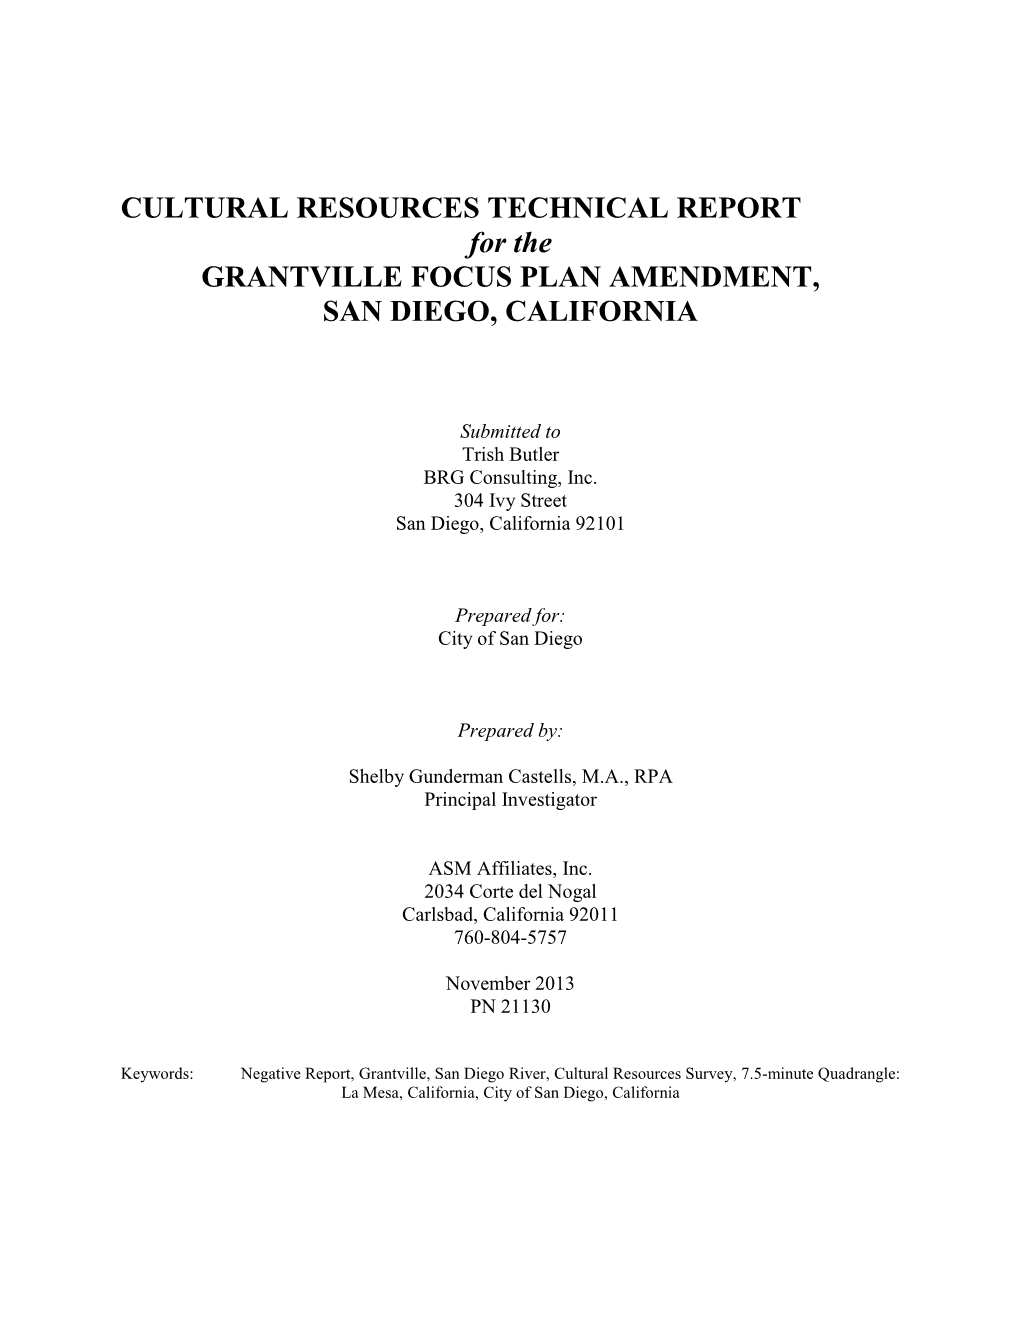 CULTURAL RESOURCES TECHNICAL REPORT for the GRANTVILLE FOCUS PLAN AMENDMENT, SAN DIEGO, CALIFORNIA